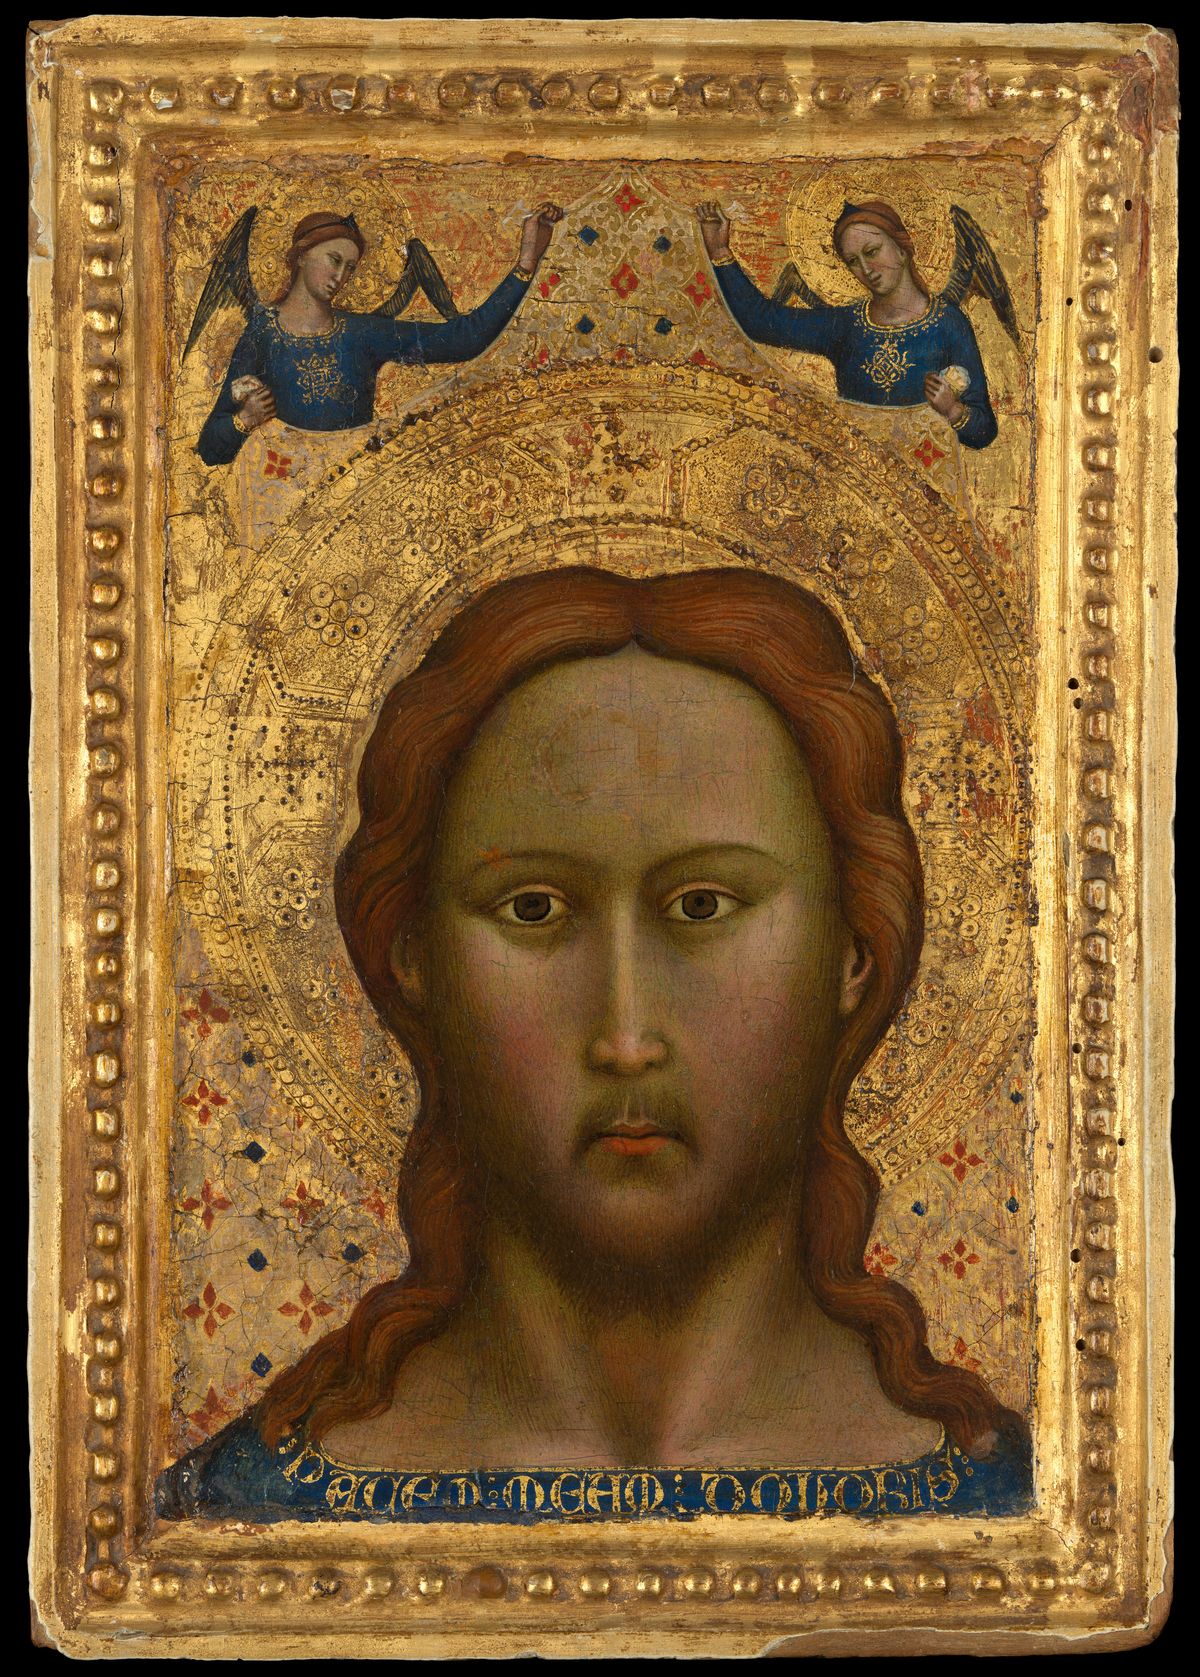 Head of Christ (mid 14th Century) by Master of the Orcagnesque Misericordia - Public Domain Catholic Painting